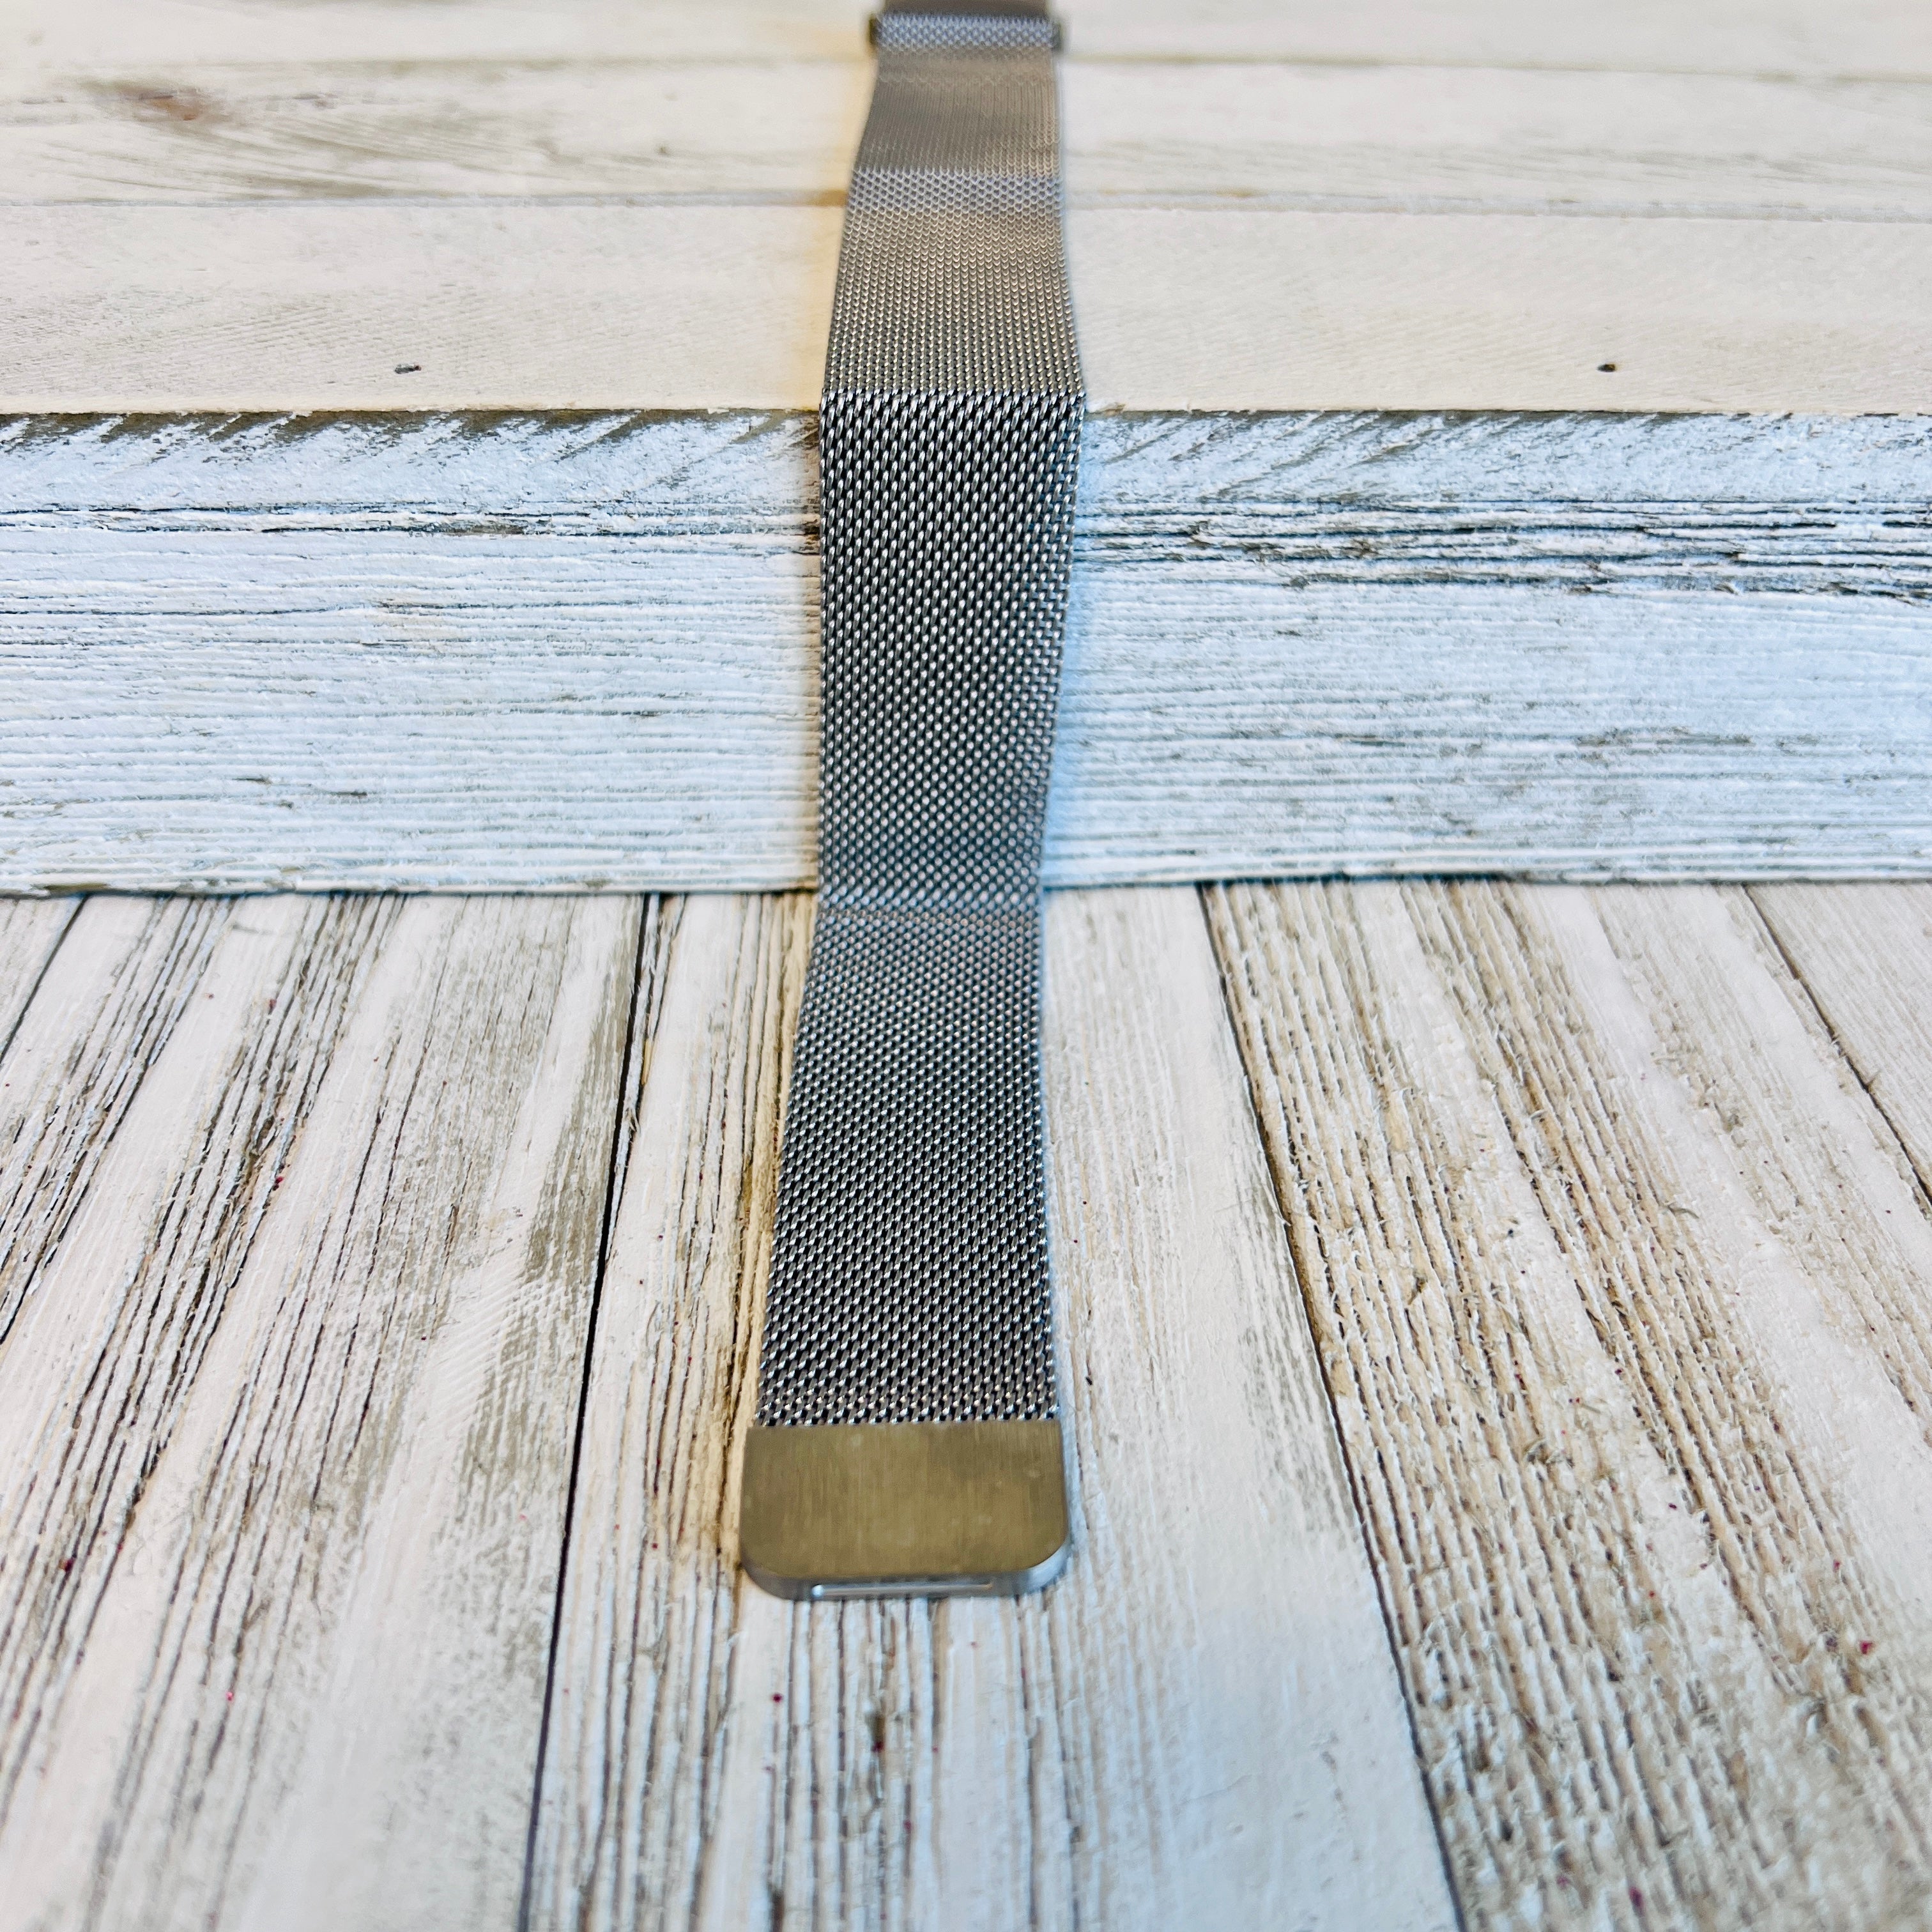 Milanese Loop Band For Samsung Watch Multiple Prints Available